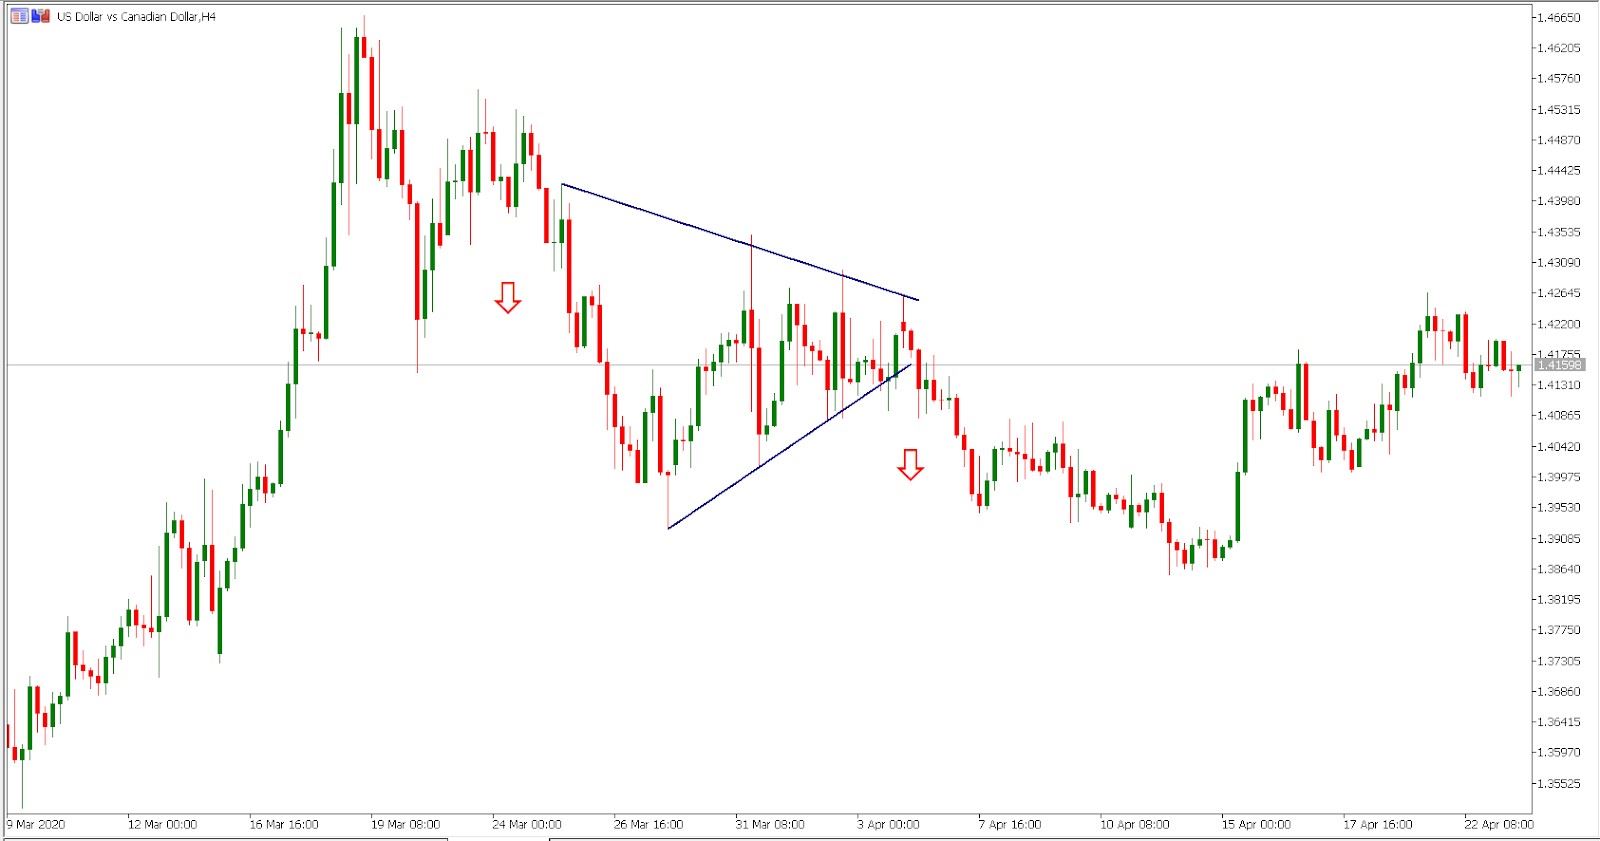 USD/CAD H4 chart - Spotting the pattern